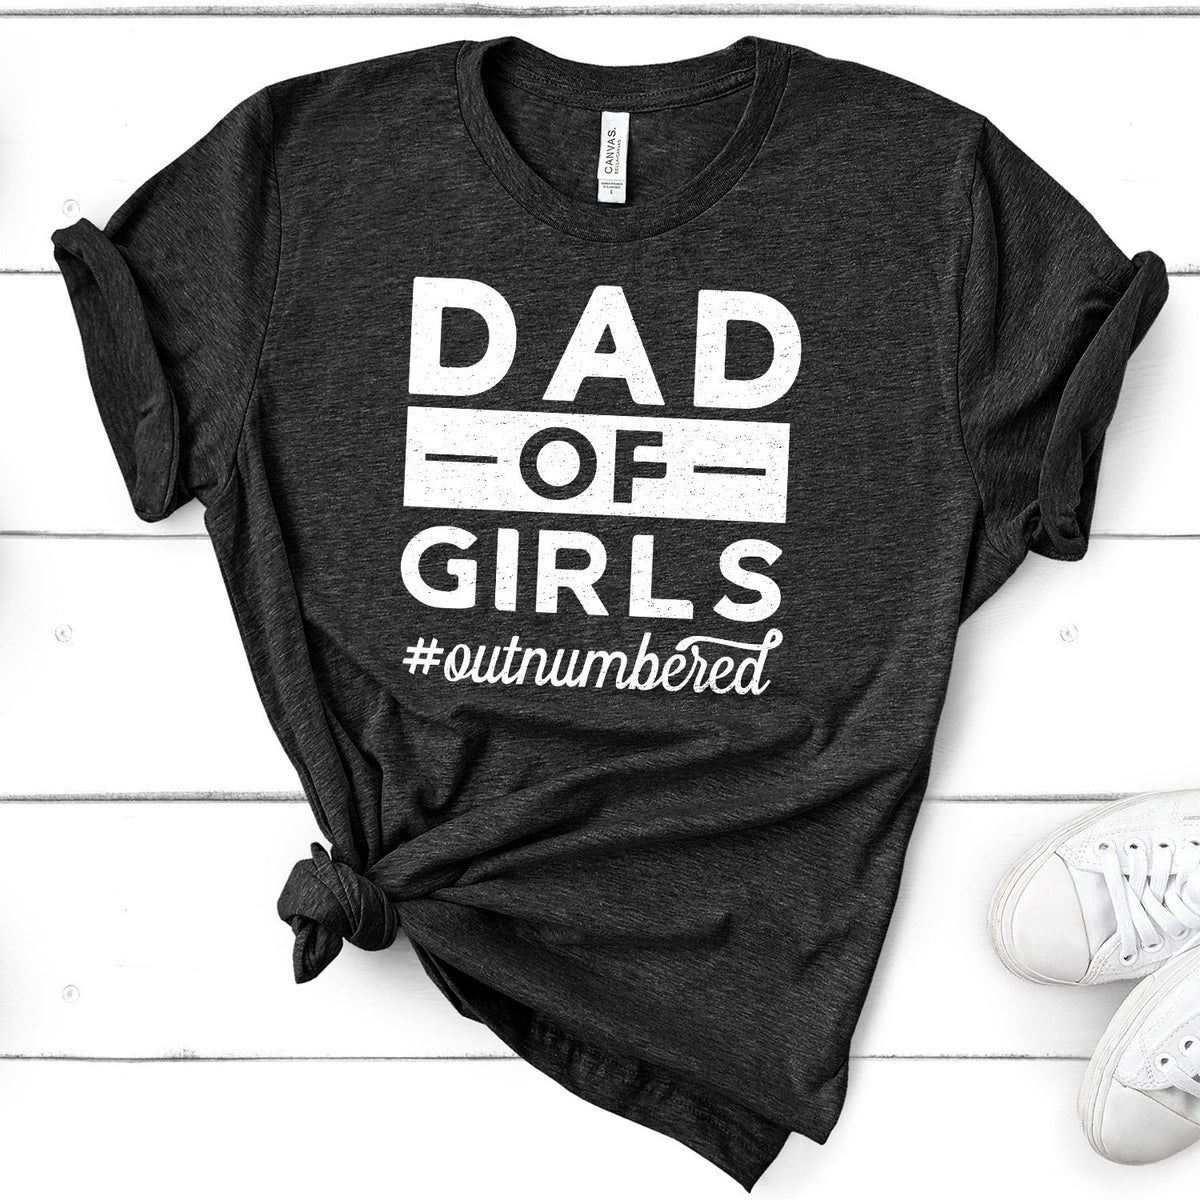 Dad Of Girls Outnumbered - Short Sleeve Tee Shirt